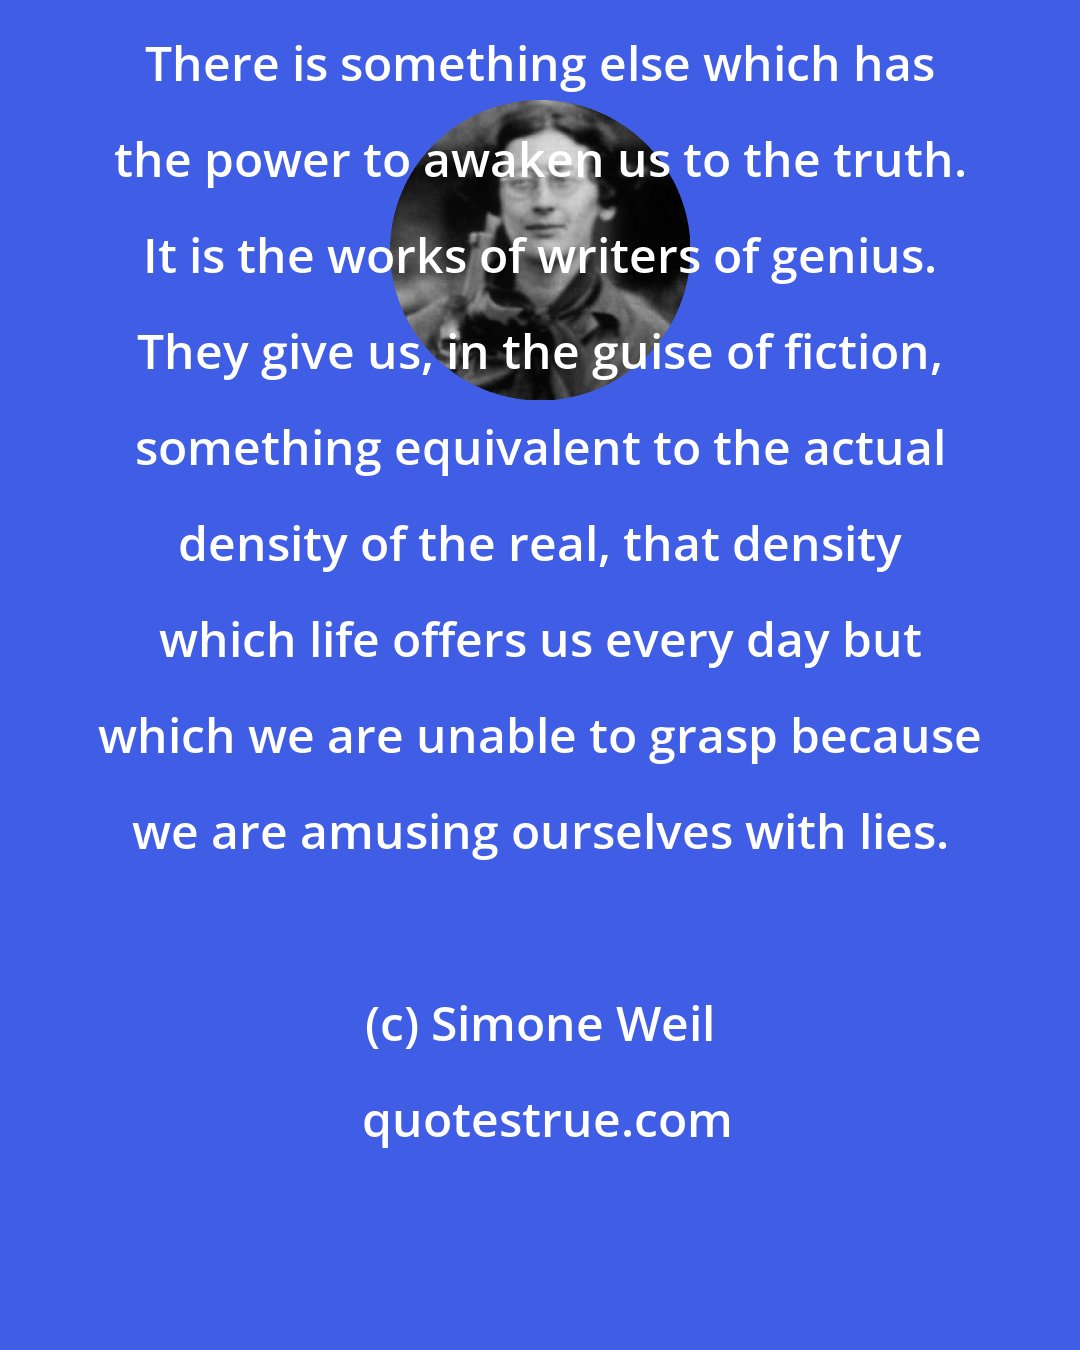 Simone Weil: There is something else which has the power to awaken us to the truth. It is the works of writers of genius. They give us, in the guise of fiction, something equivalent to the actual density of the real, that density which life offers us every day but which we are unable to grasp because we are amusing ourselves with lies.